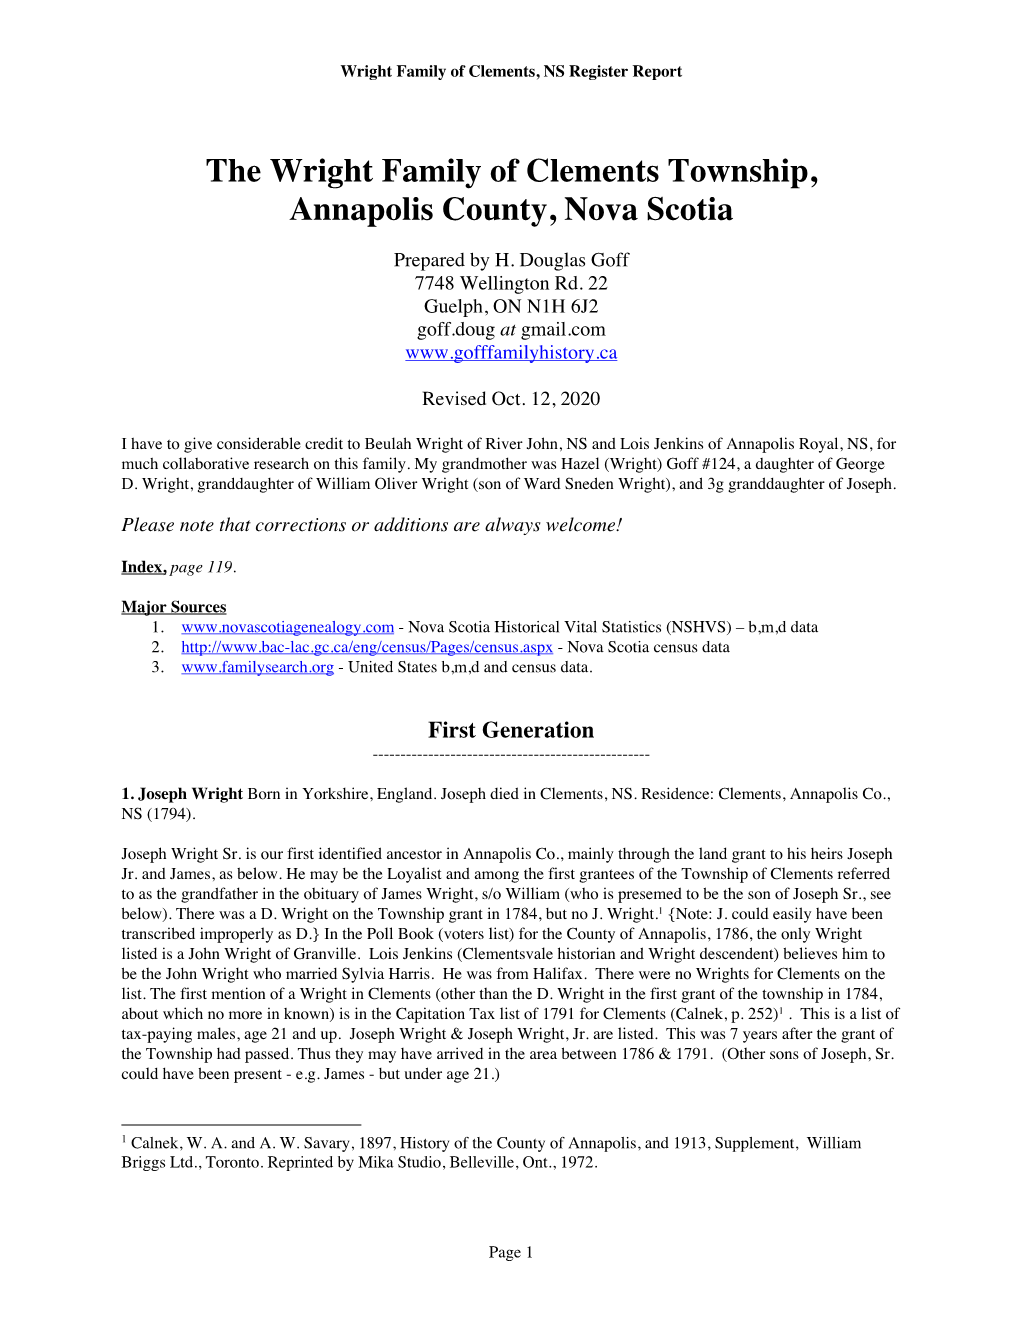 The Wright Family of Clements Township, Annapolis County, Nova Scotia